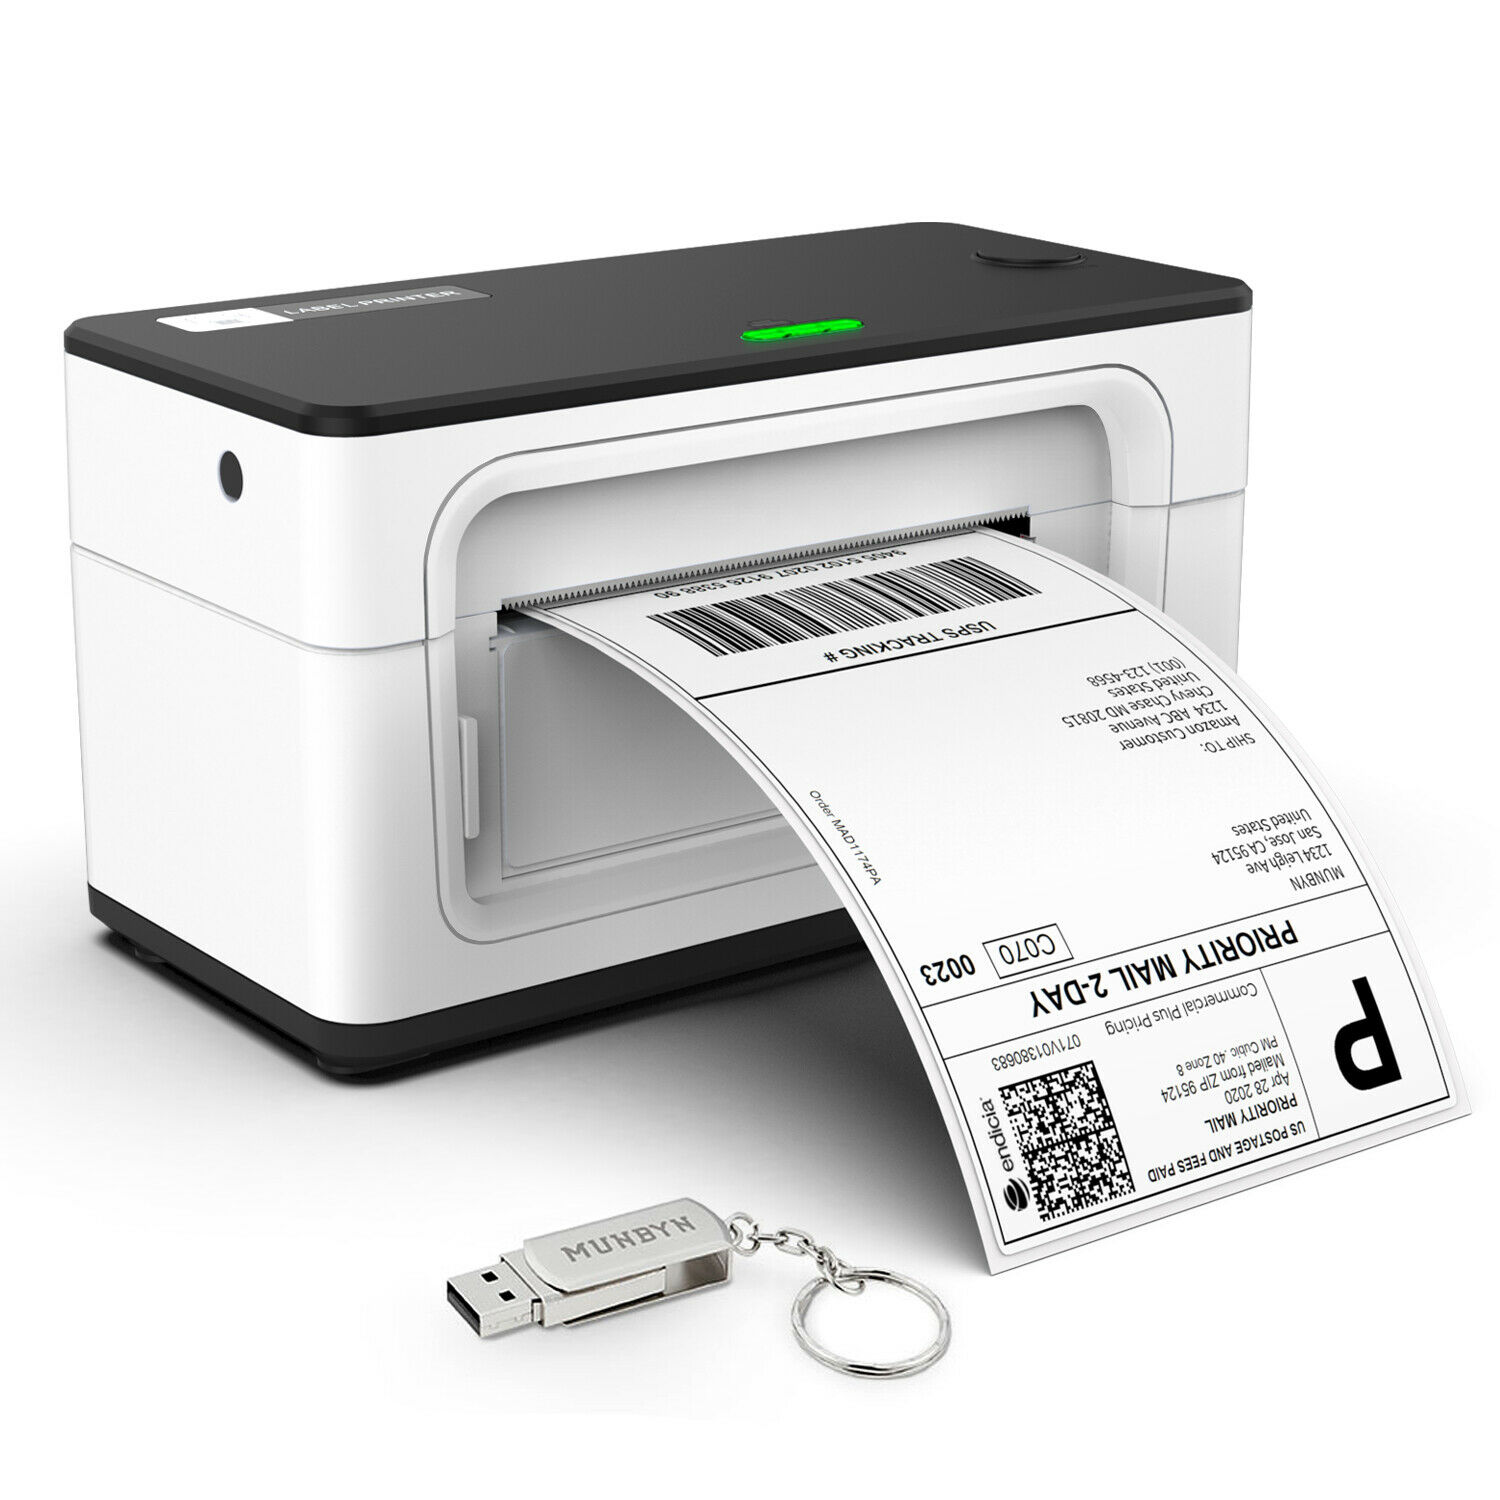 Munbyn Label Printer For Shipping Packages,works With Ups,usps,fedex, Ebay, Esty